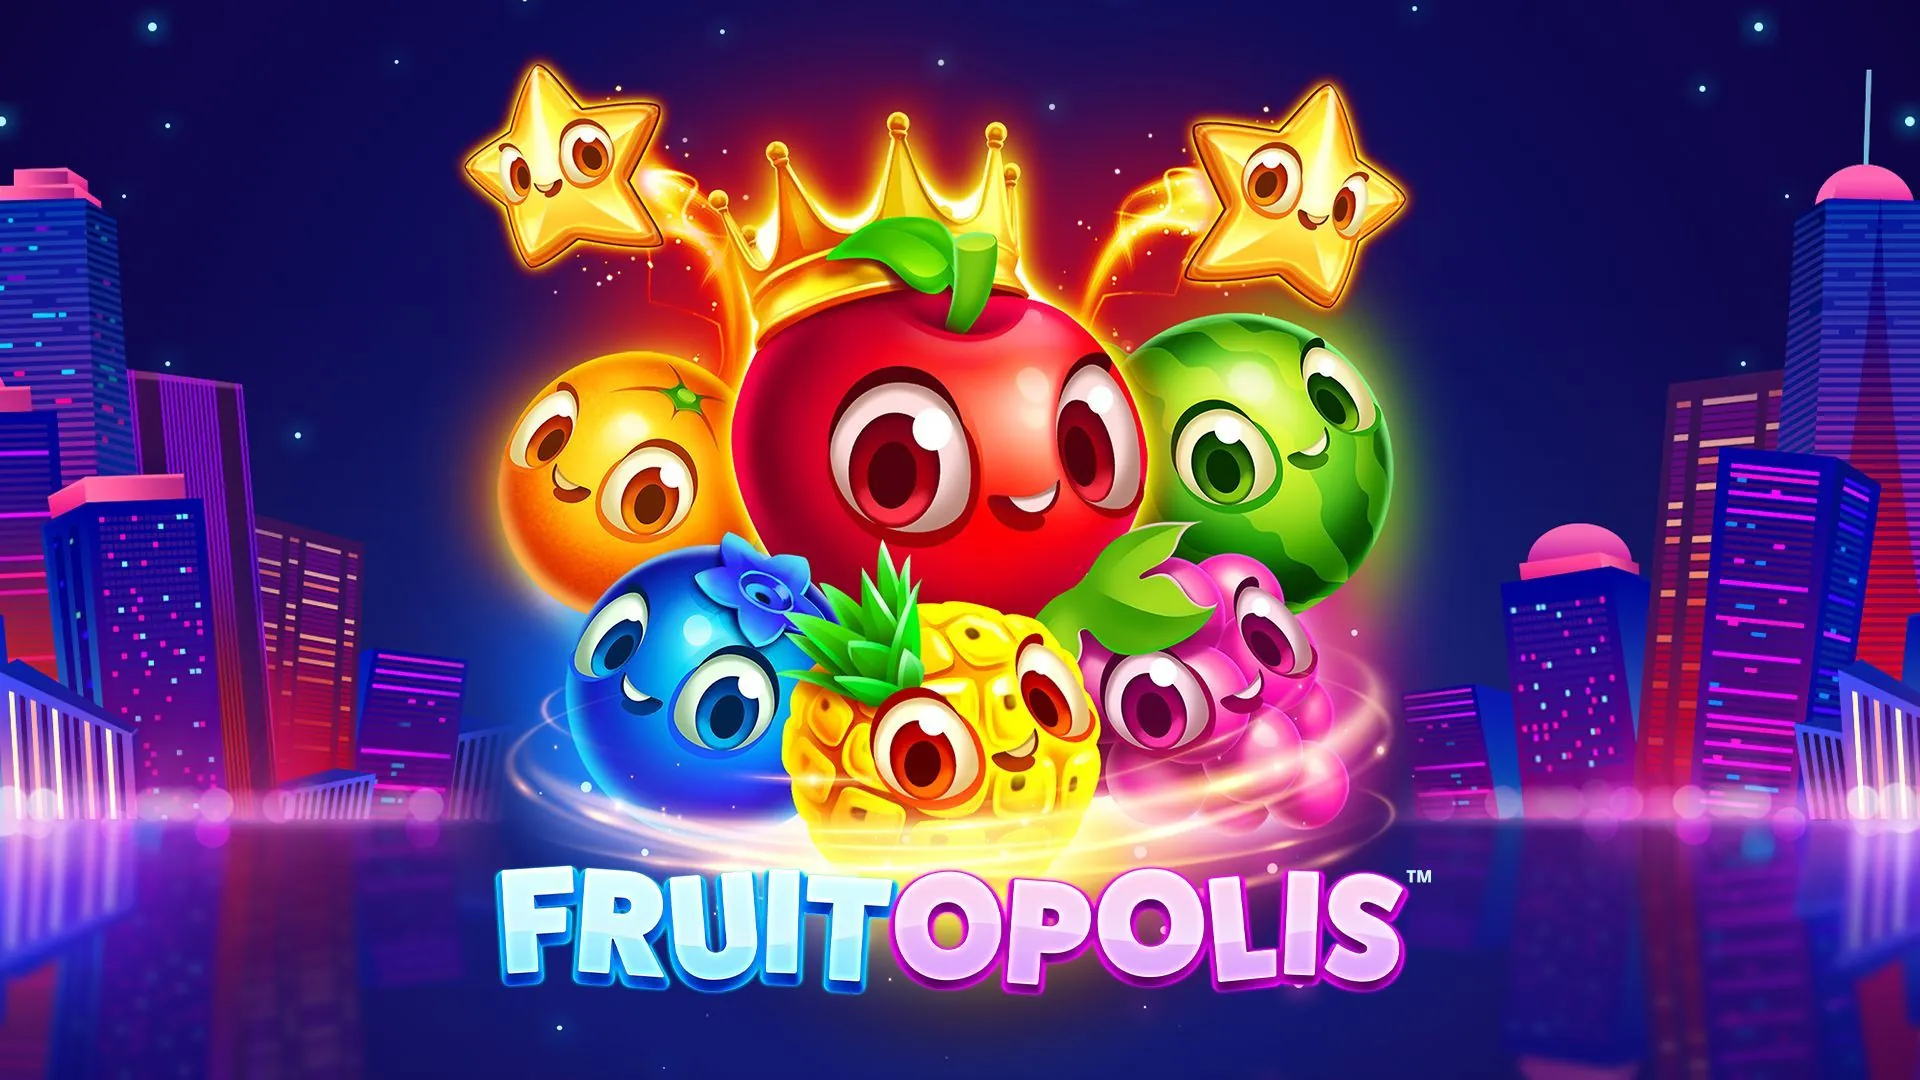 Our latest Juicy game Fruitopolis is Out Today